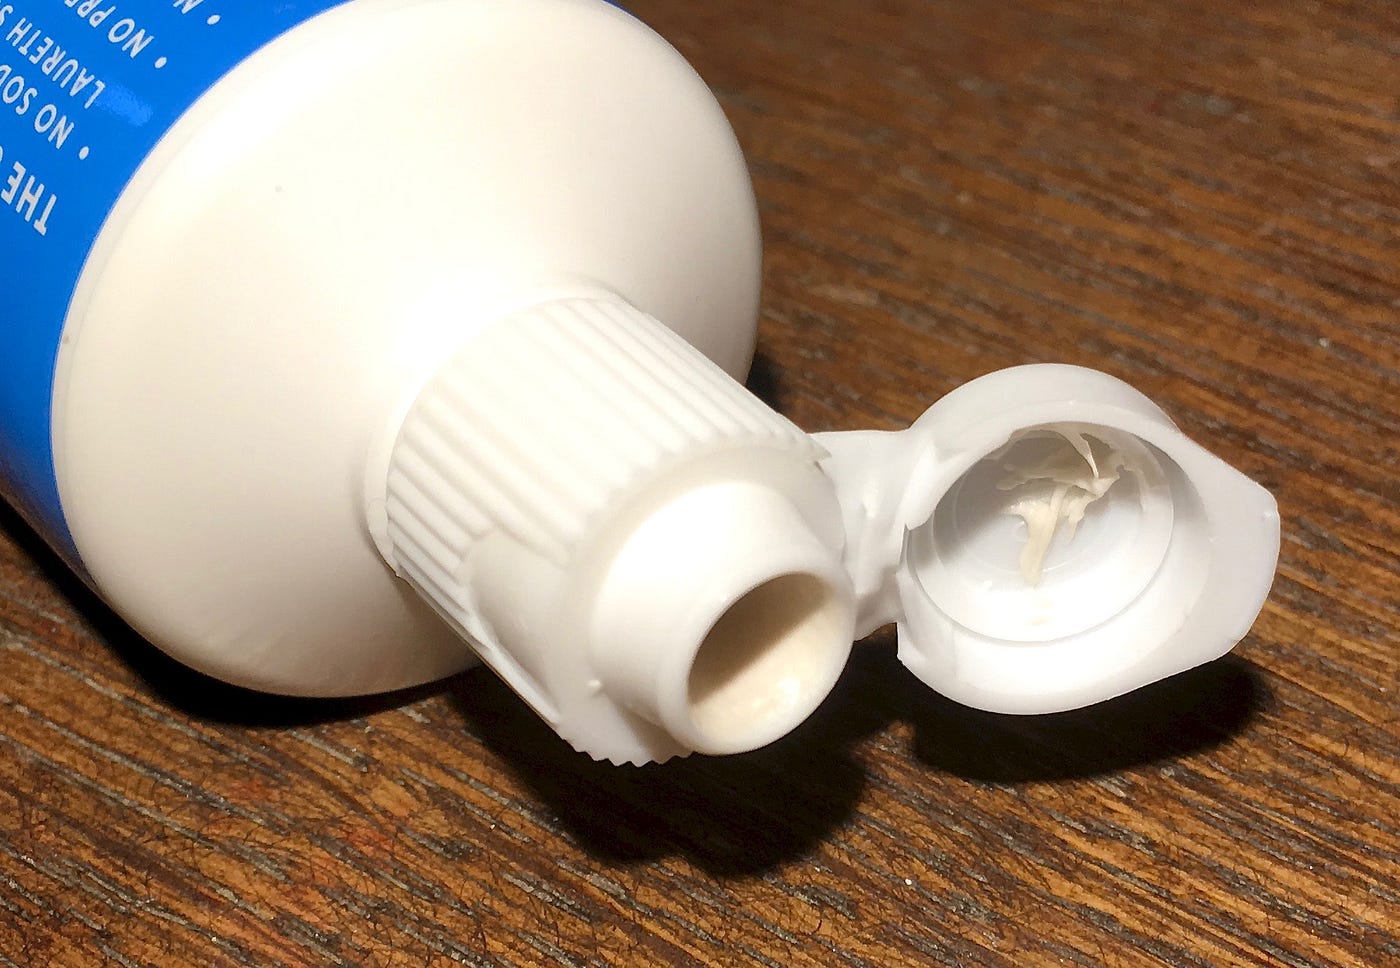 Toothpaste Flip-Top Cap — Greatest Blessing of Them All?, by Phil Houtz